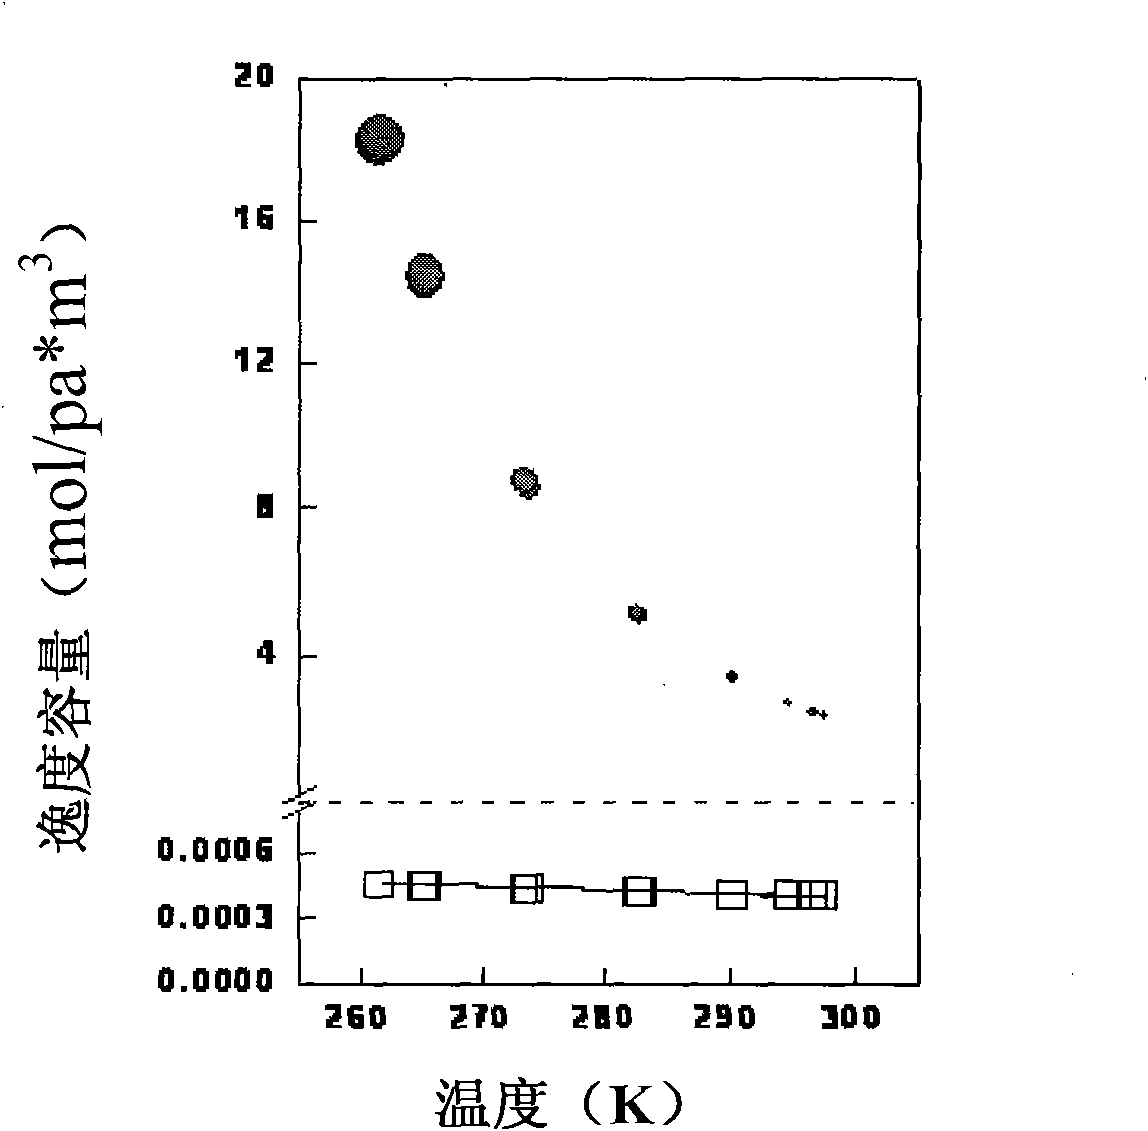 Method for analyzing dynamic transferred water quality based on fugacity theory